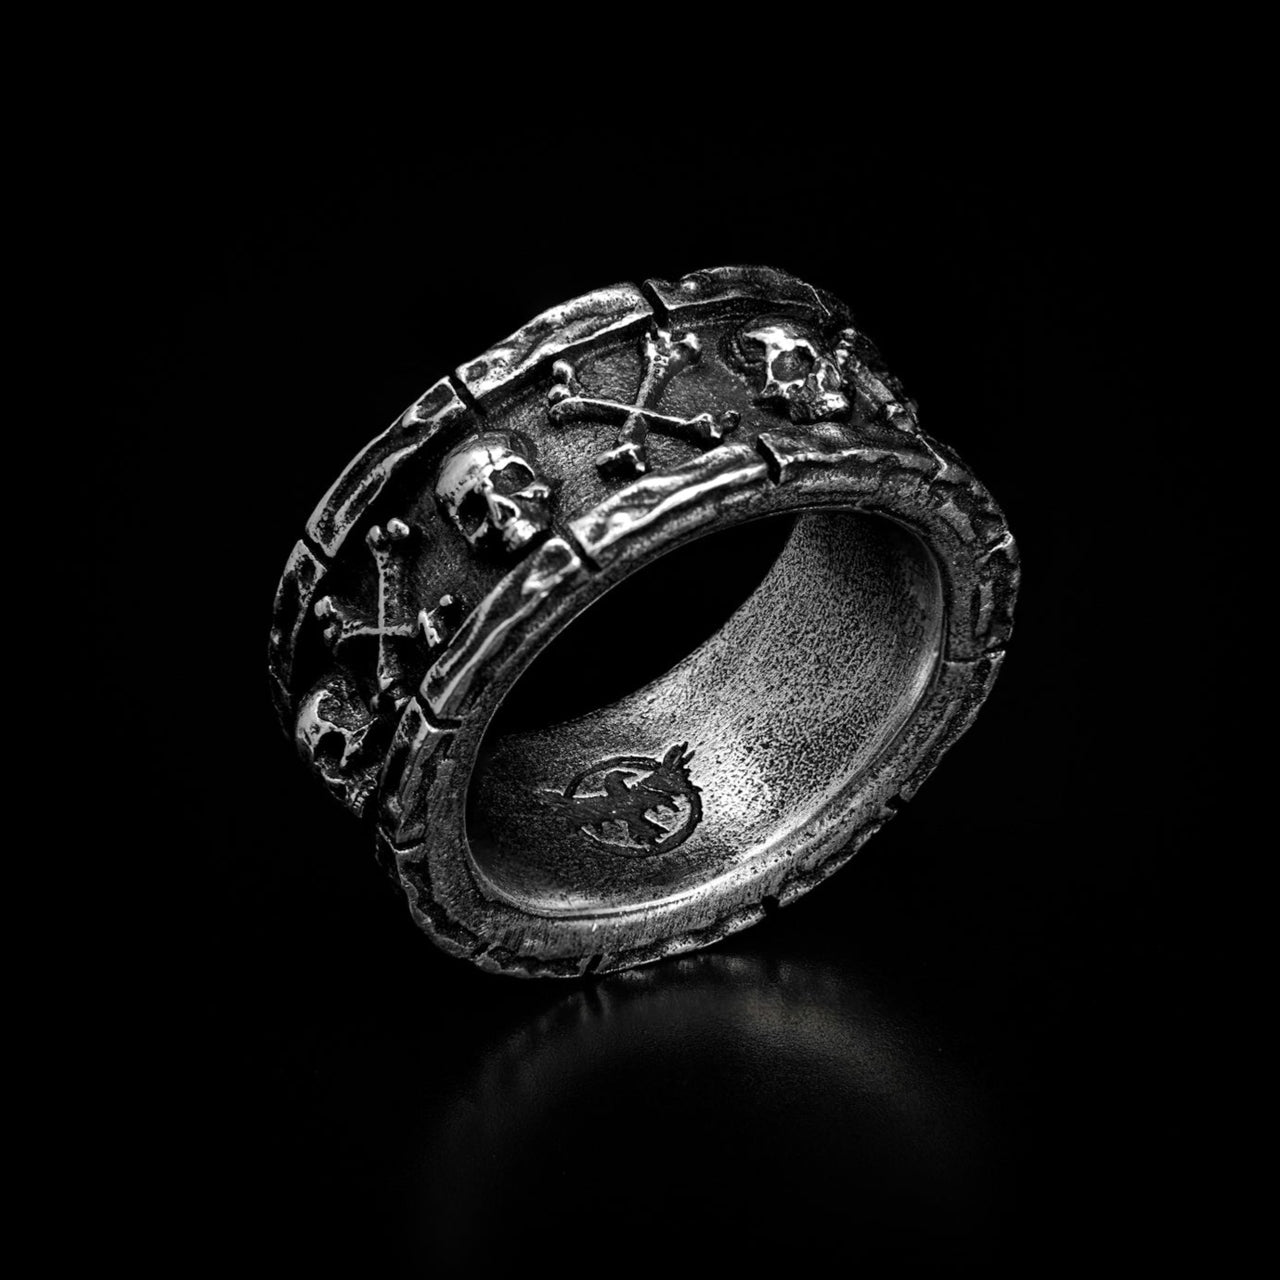 Crypt Ring - Chunky Sterling Silver Band Ring - Gothic Jewellery